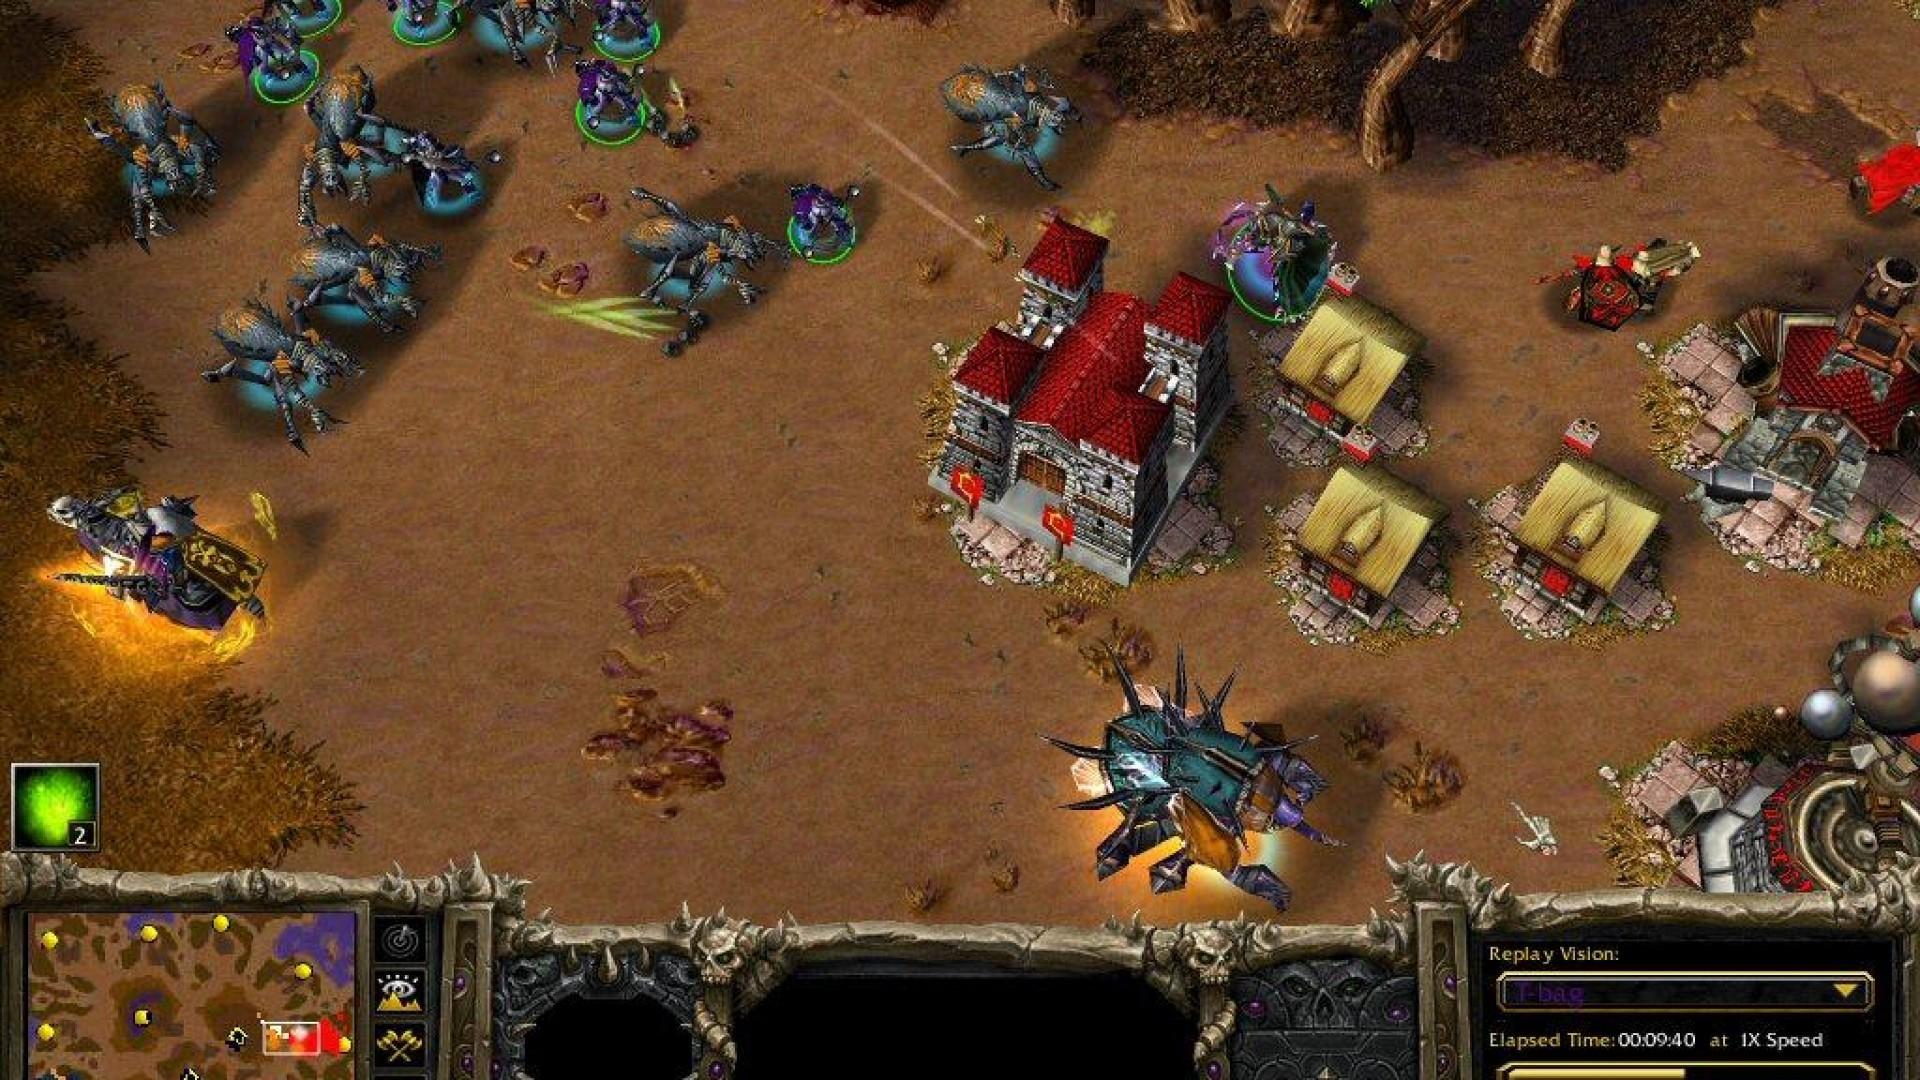 warcraft 3 reign of chaos download full game for pc